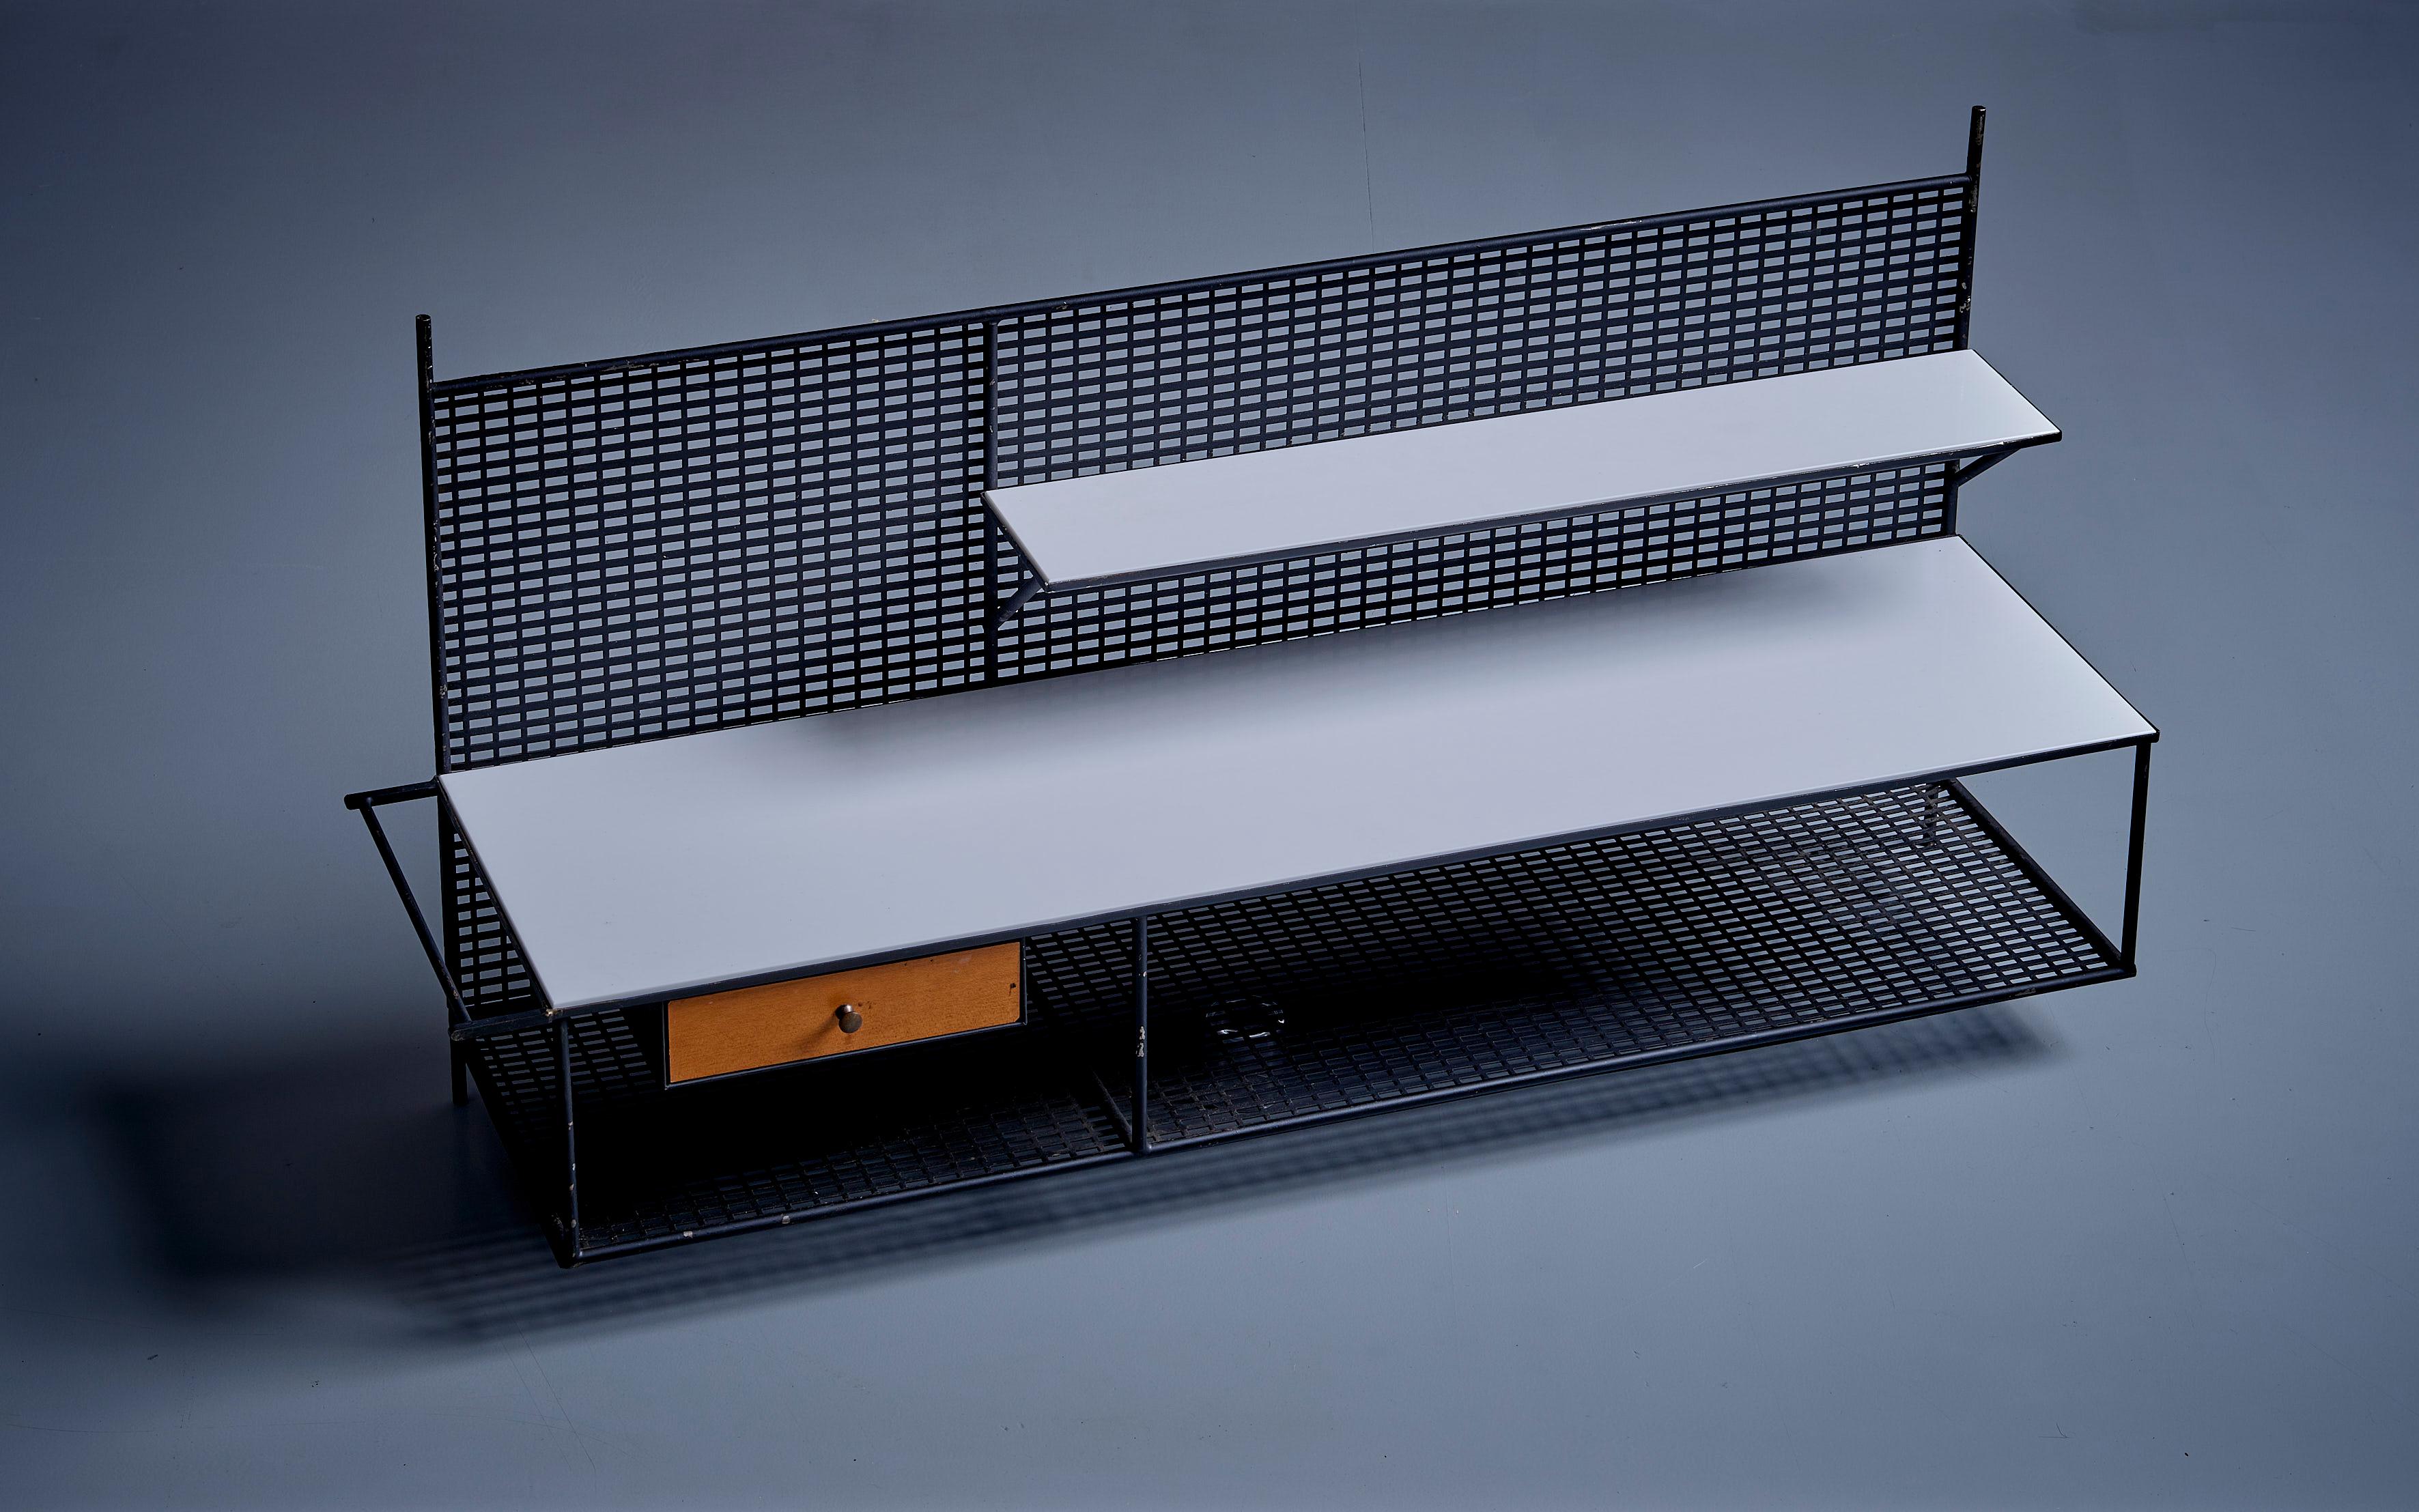 Paul McCobb for Bryce Wall Shelf in Wood and Metal, USA - 1950s. Wall-mounted floating console with wooden drawer and black metal frame. Shelves are covered with white Vitrolite glass panels. Fair original condition. 

Paul McCobb (1917-1969) was an